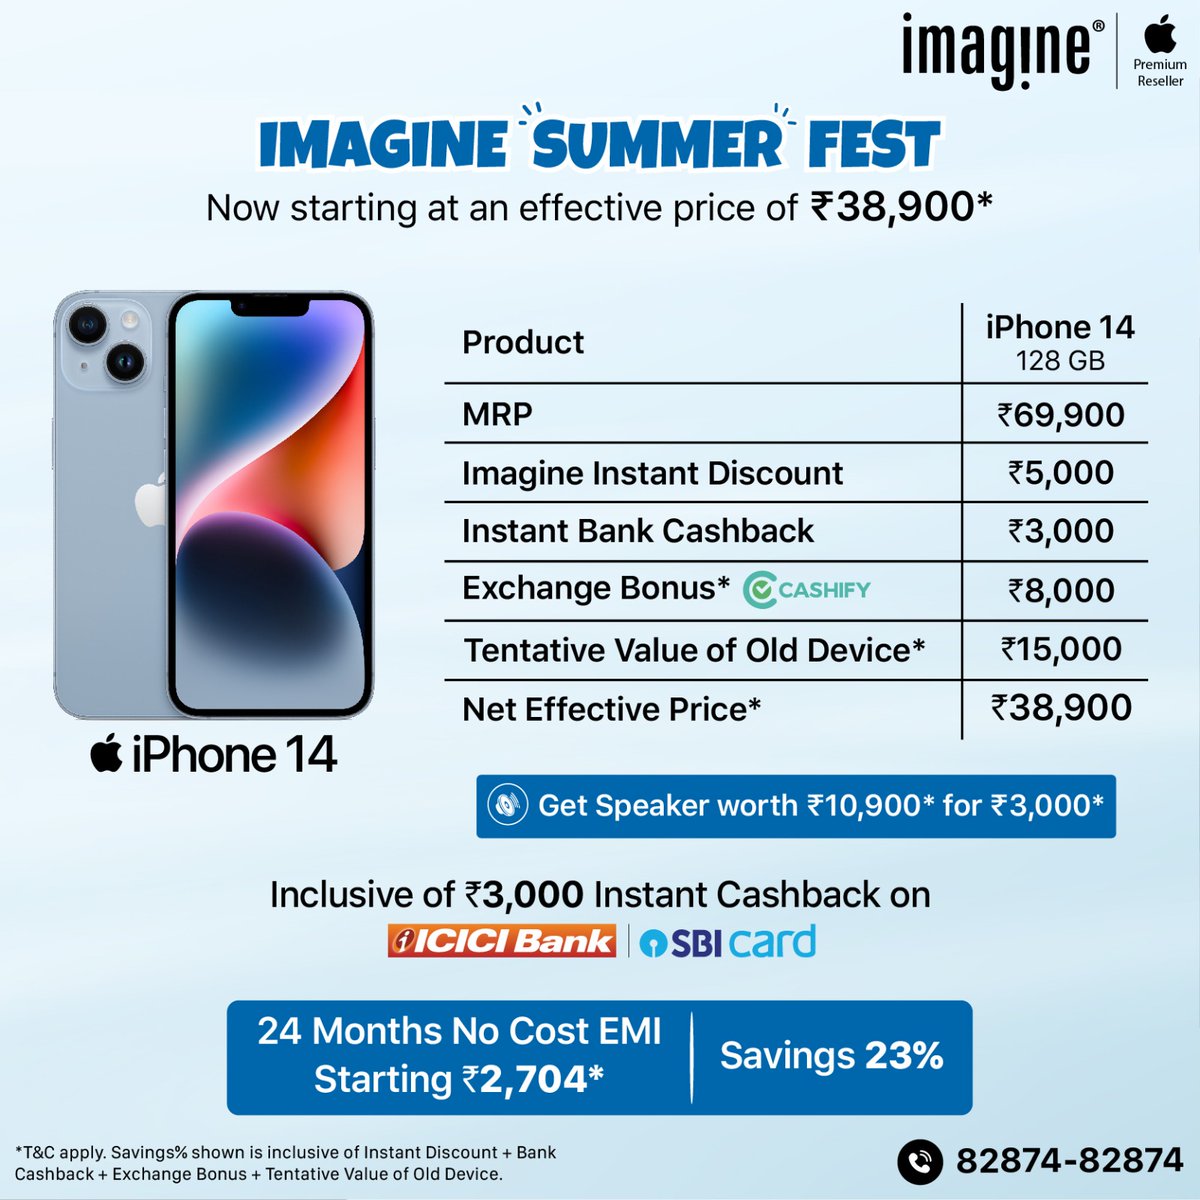 Celebrate Summer at Imagine: Exclusive Apple Deals Await! 🌞 iPhone starting at an effective price of ₹25,900* ✅ Upto ₹4,000* Instant Cashback on select banks ✅ Upto ₹7,000* Instant In-store discount ✅ Upto ₹8,000* Exchange bonus ✅ GST Invoice available ✅ Upto 24 Months